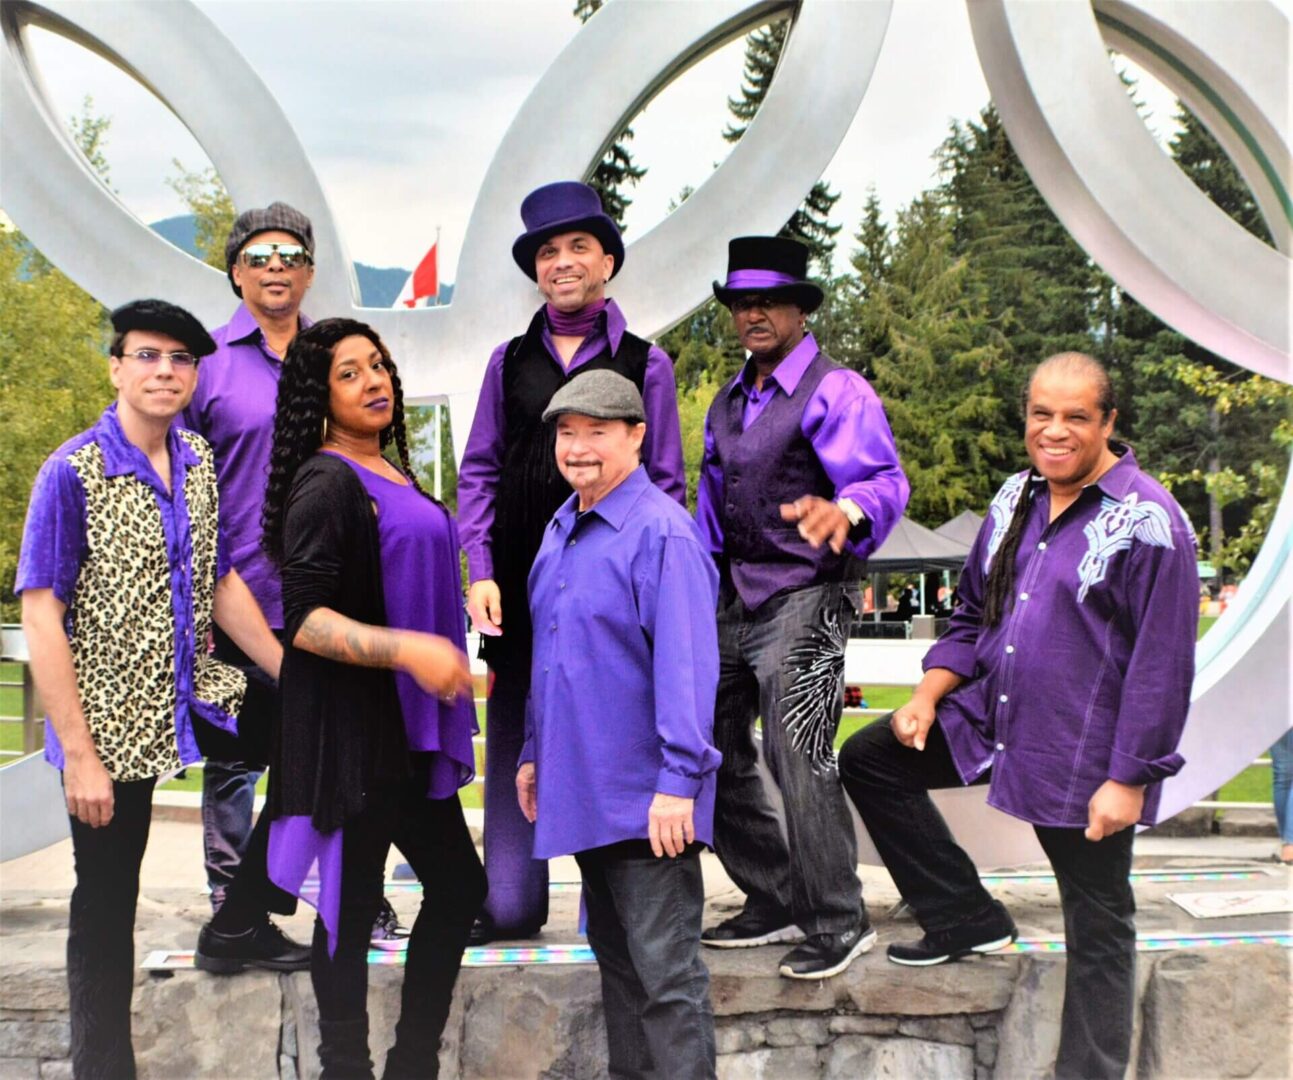 The Family Stone band in purple outfits